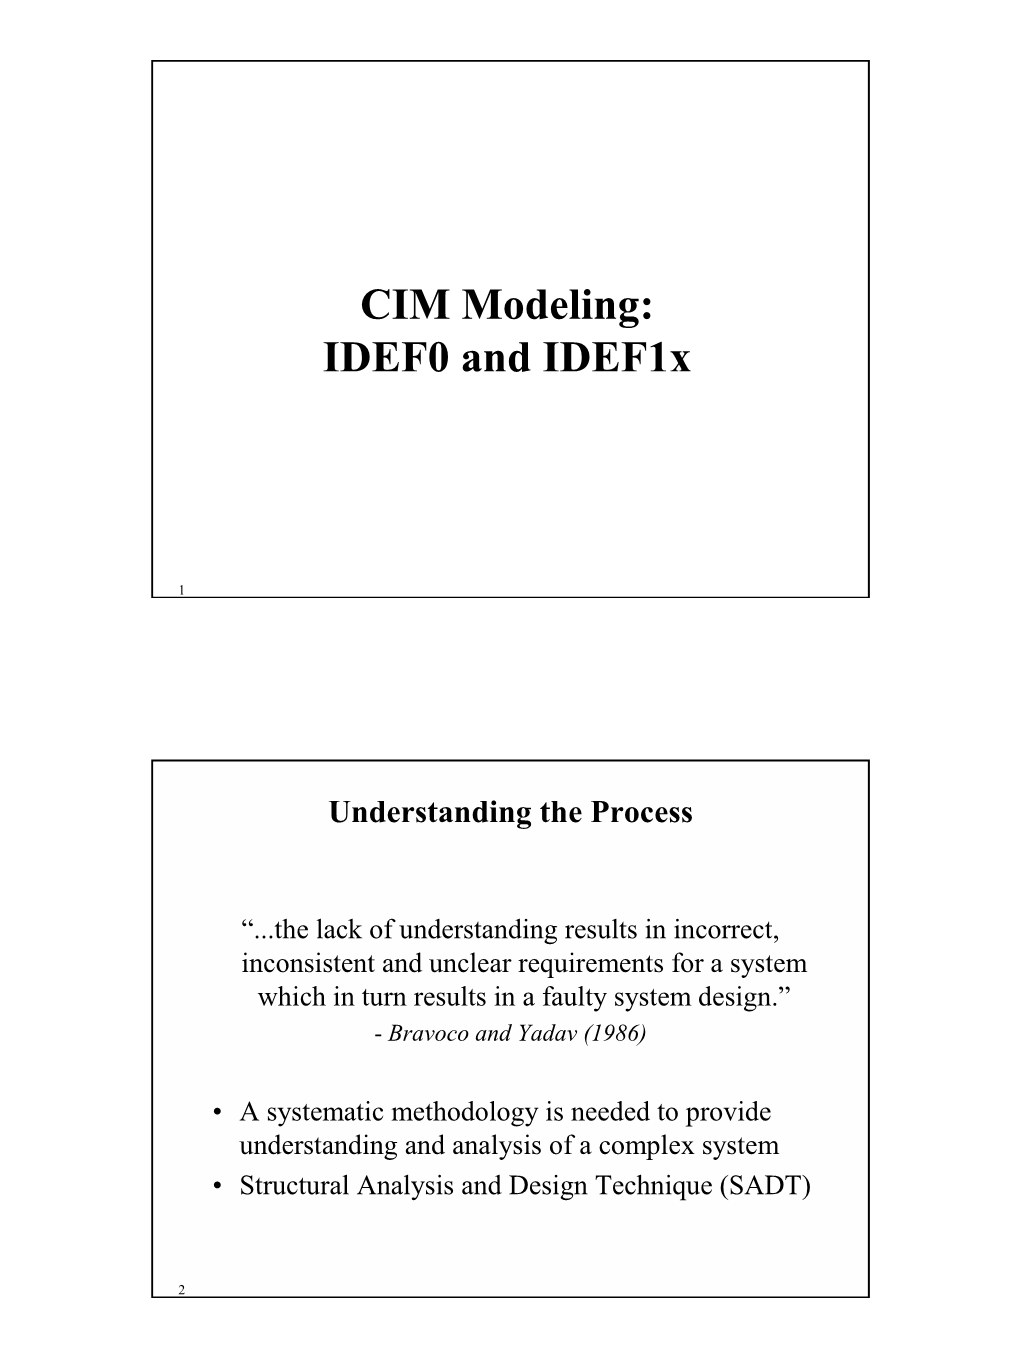 CIM Modeling: IDEF0 and Idef1x